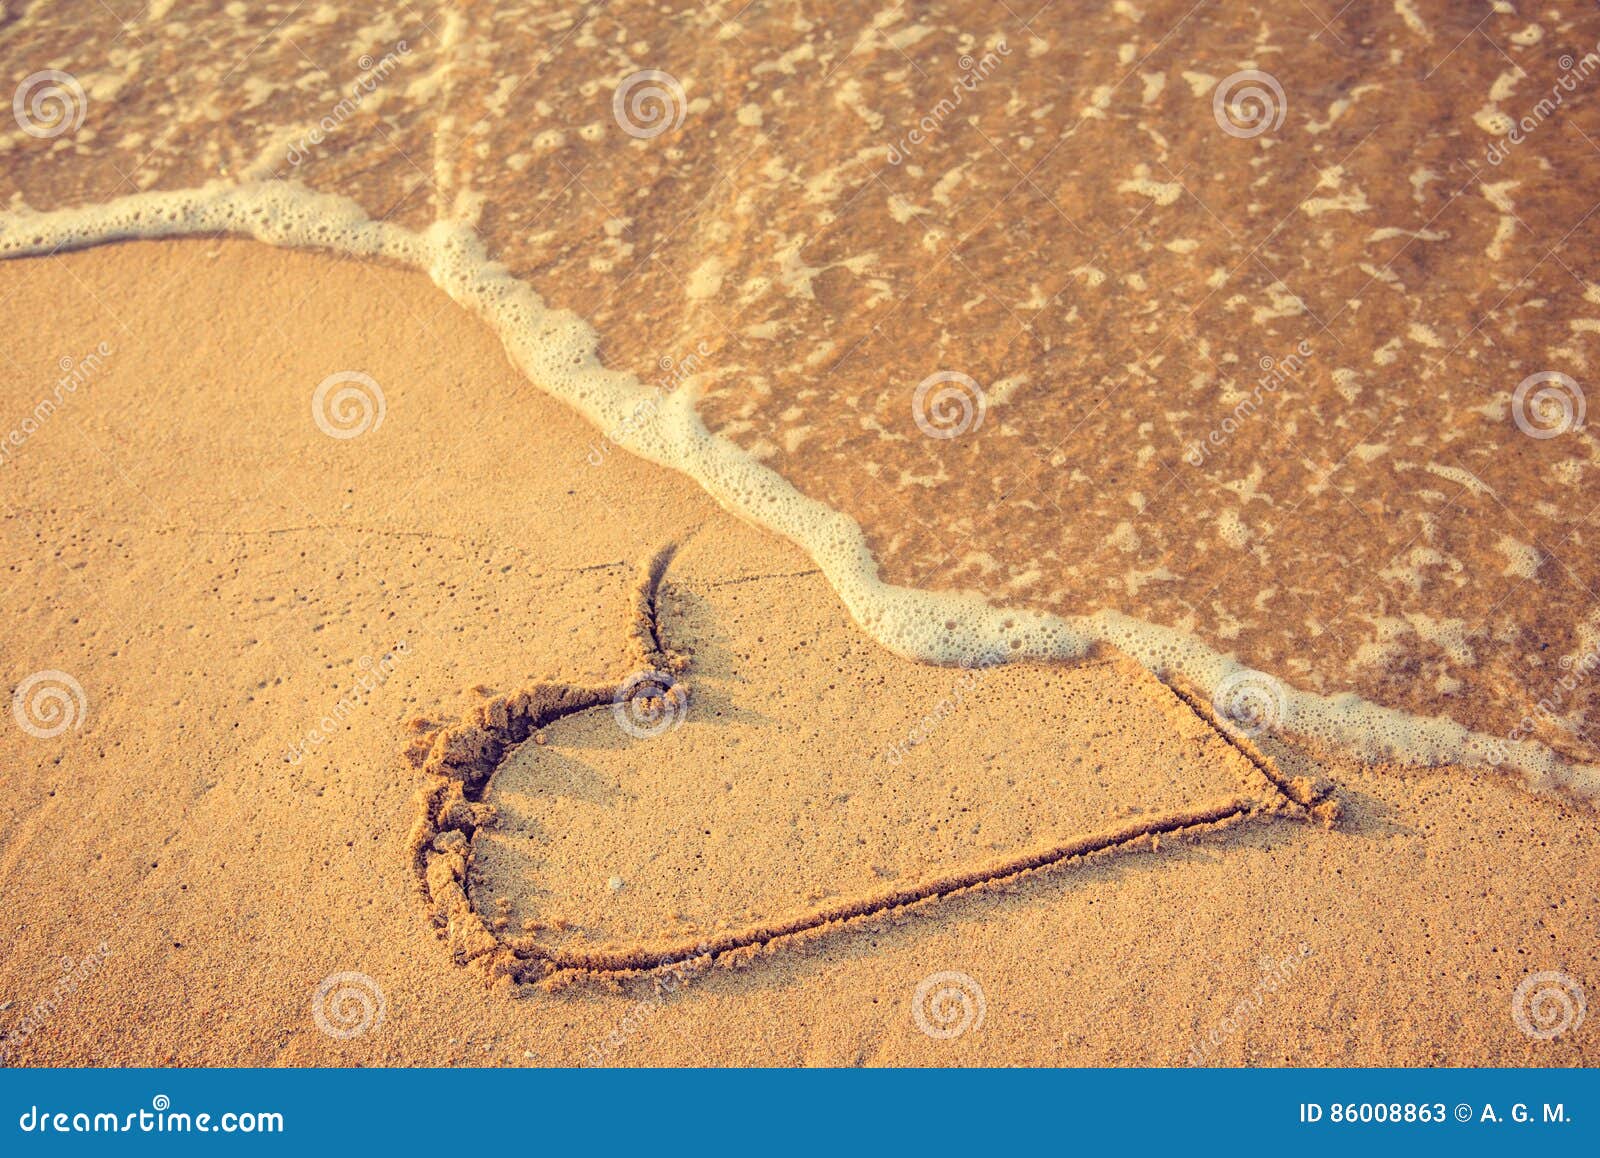 Breakup and divorce stock image. Image of couple, sand - 86008863